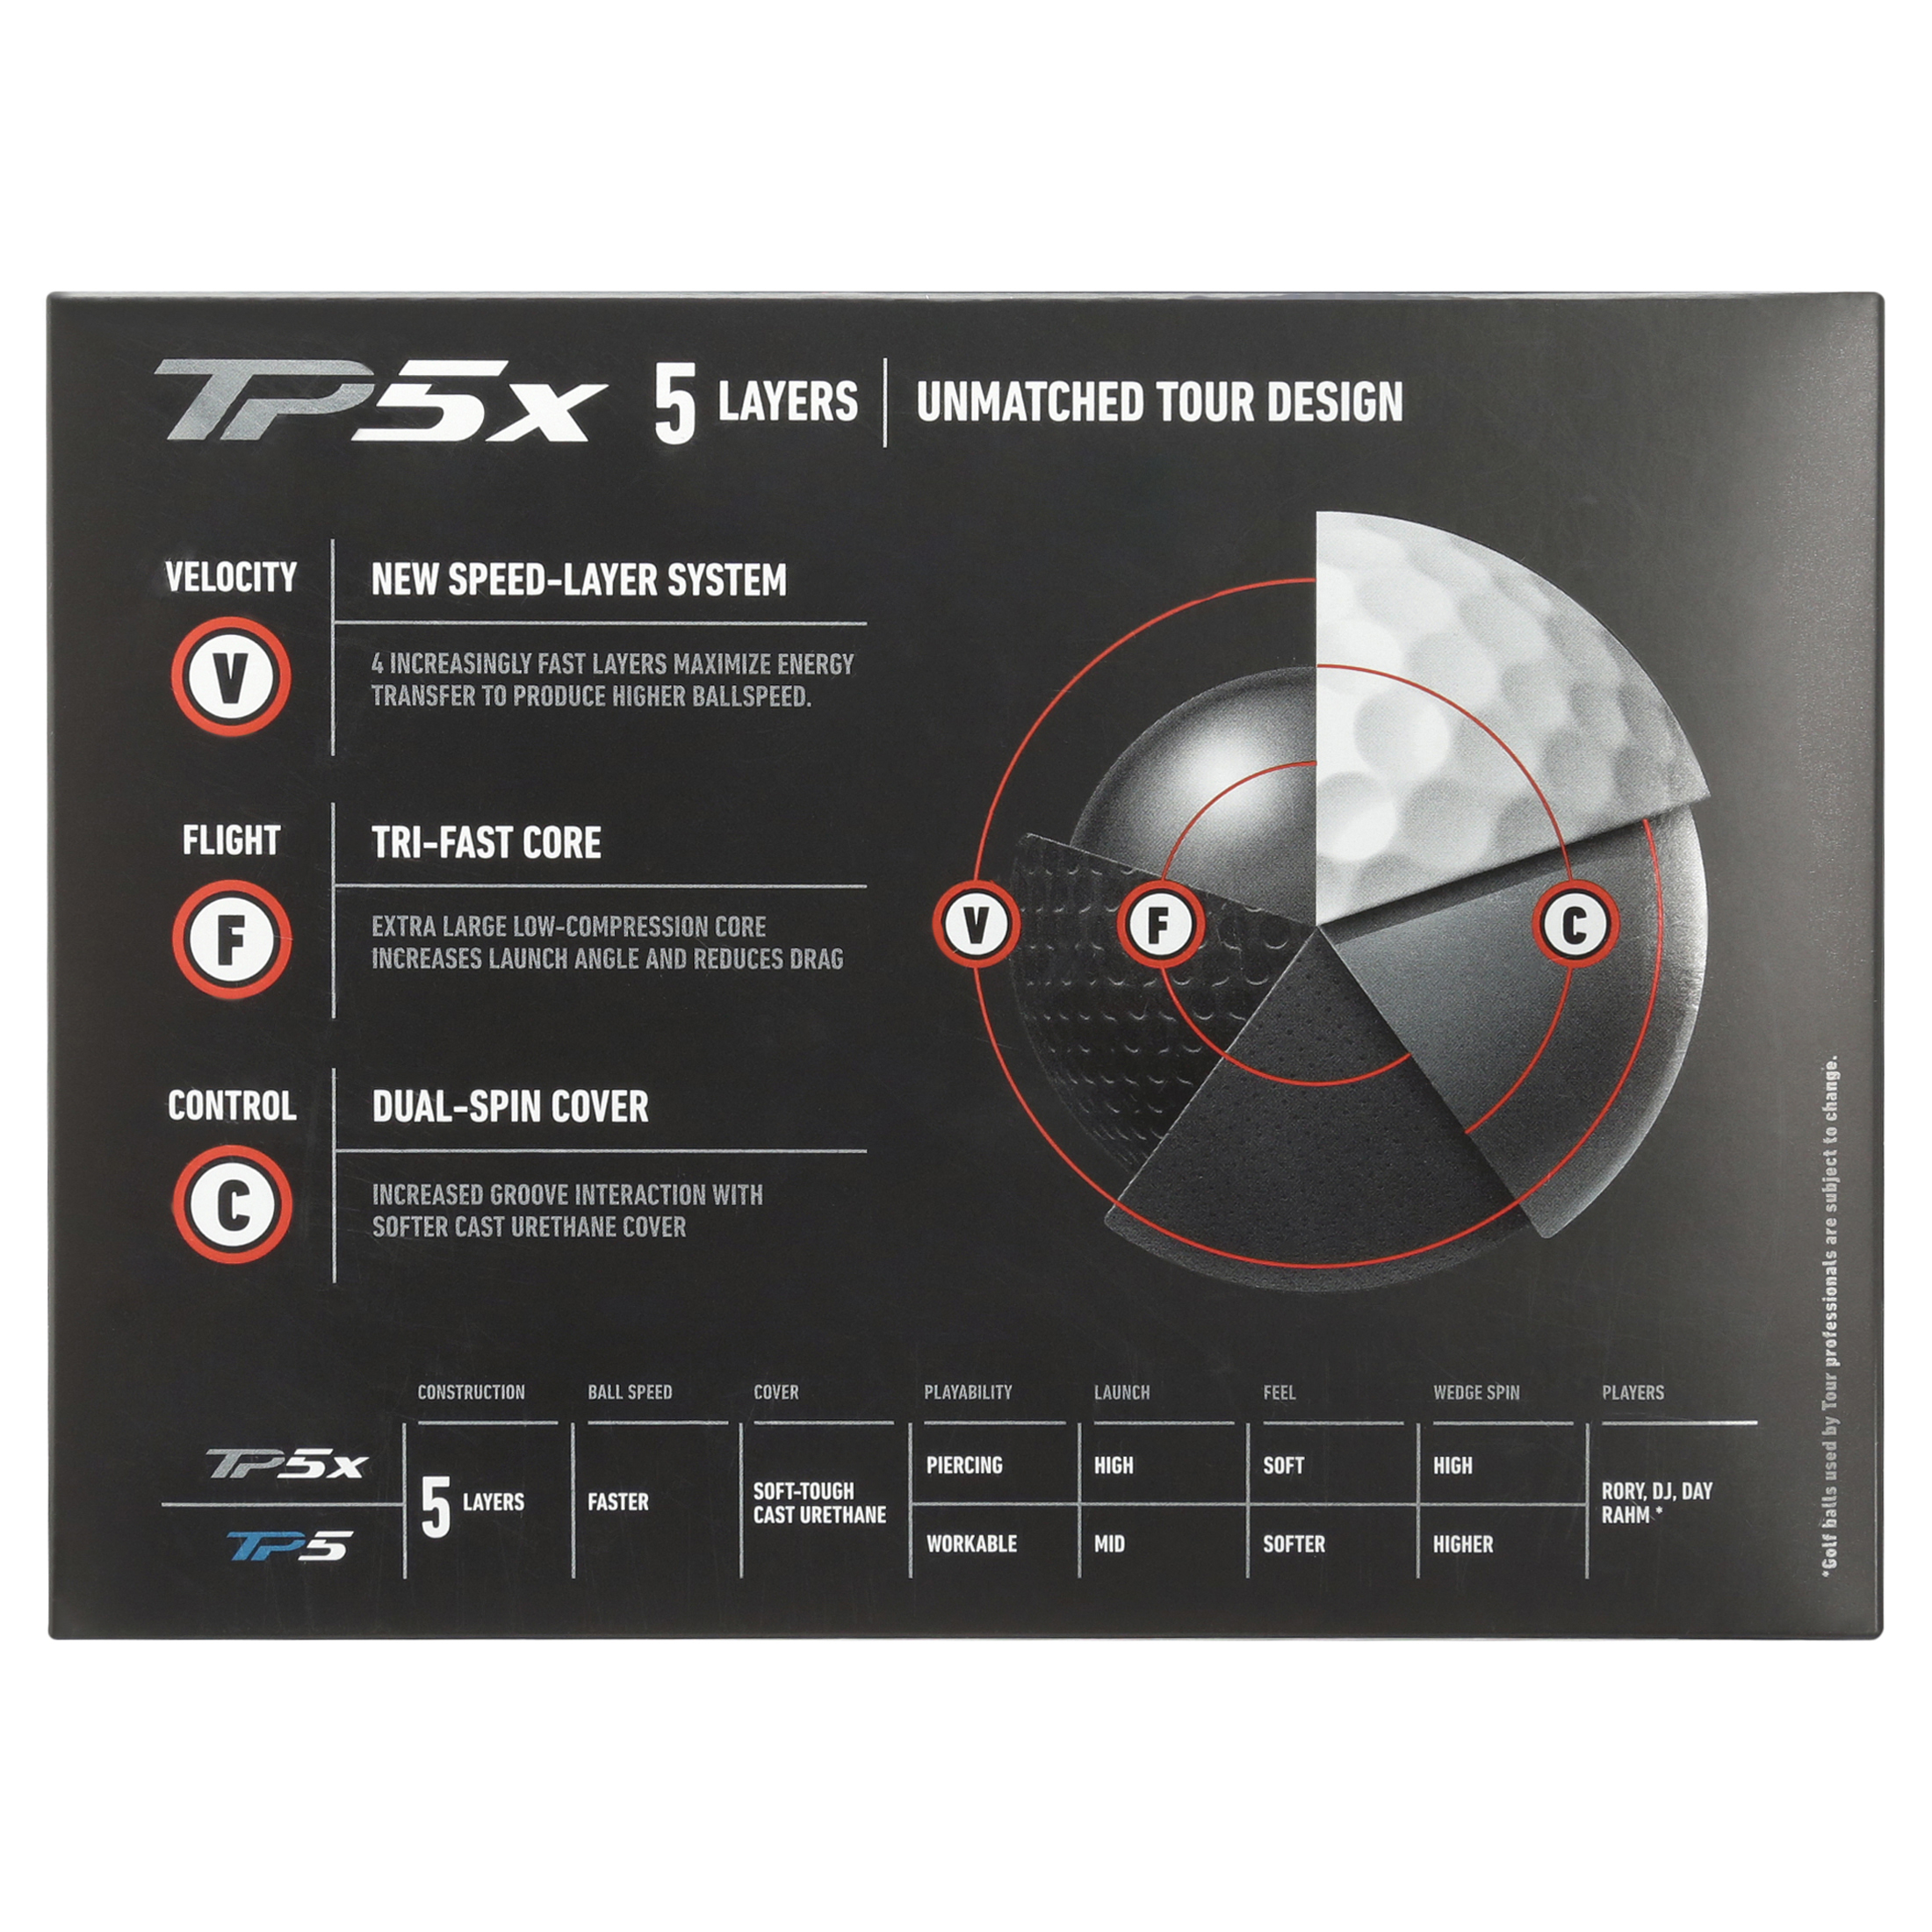 TaylorMade TP5x Golf Balls, 12 Pack - image 5 of 7